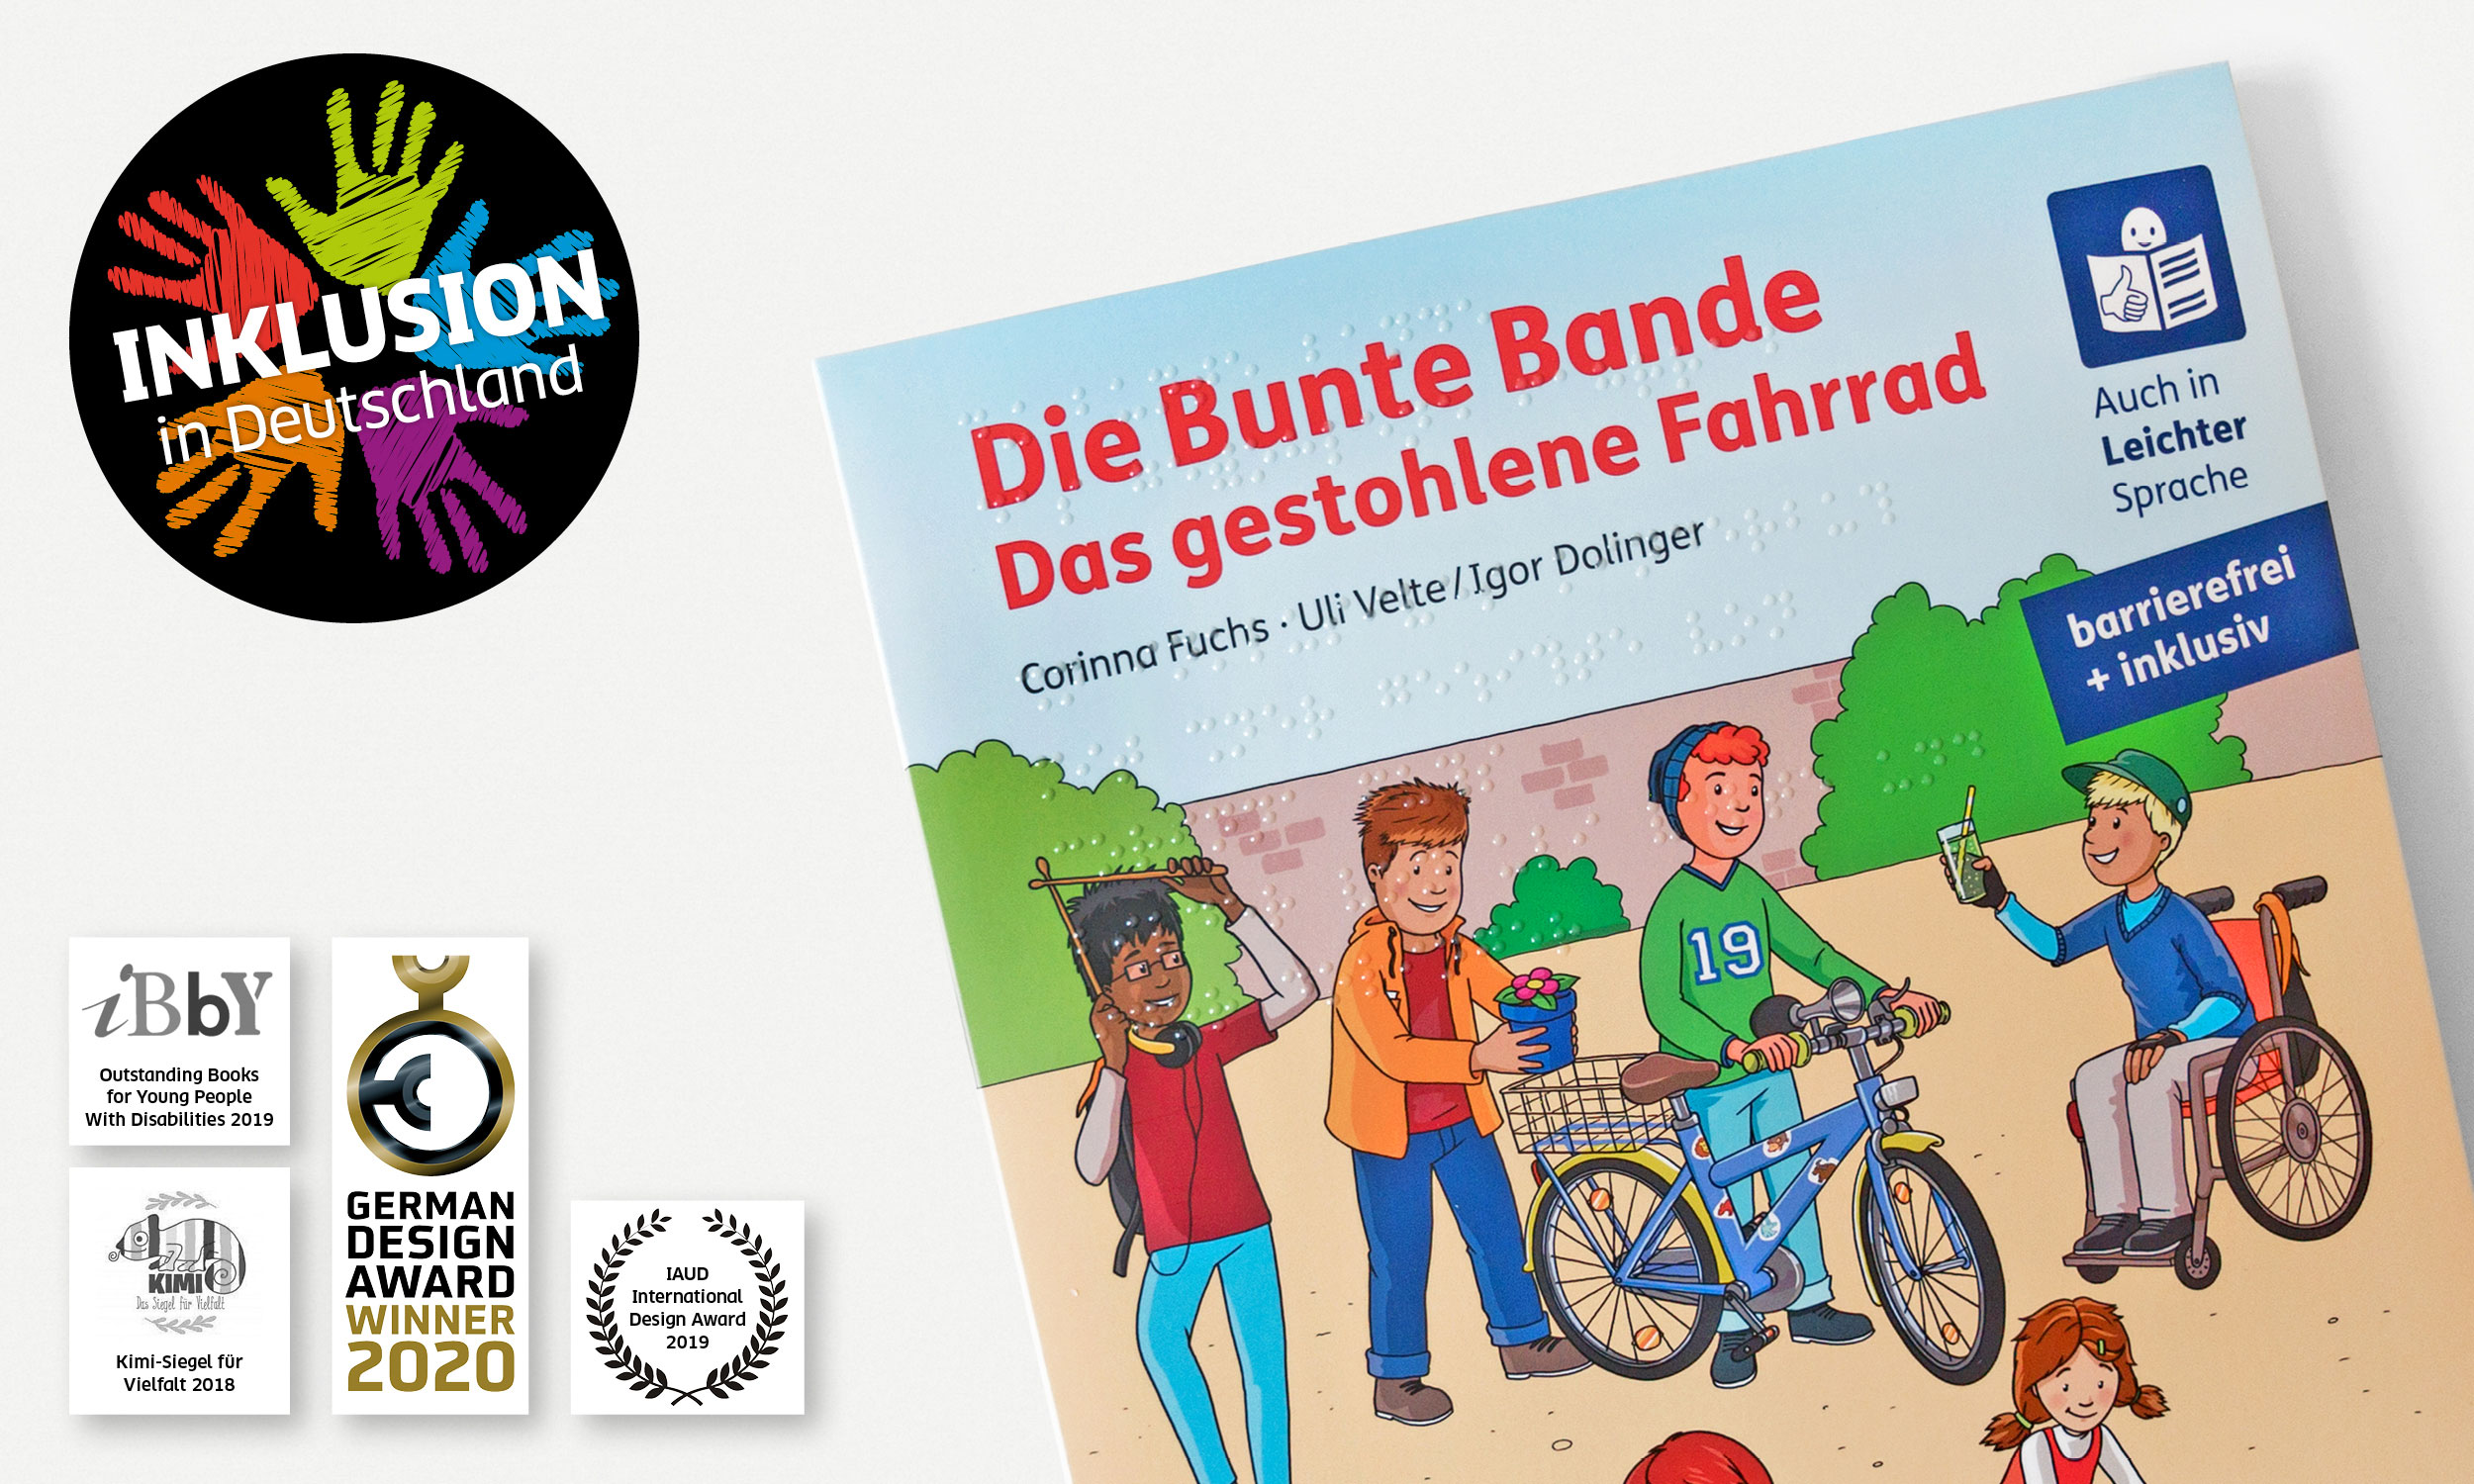 Cover of the book "Die Bunte Bande, Das gestohlene Fahrrad". In the upper left corner of the picture a black circular sticker. In it, 5 colourful hands are visible. On it is written in large white letters: \"Inclusion in Germany\". In the lower left corner the seals of the prizes for the Bunte Bande